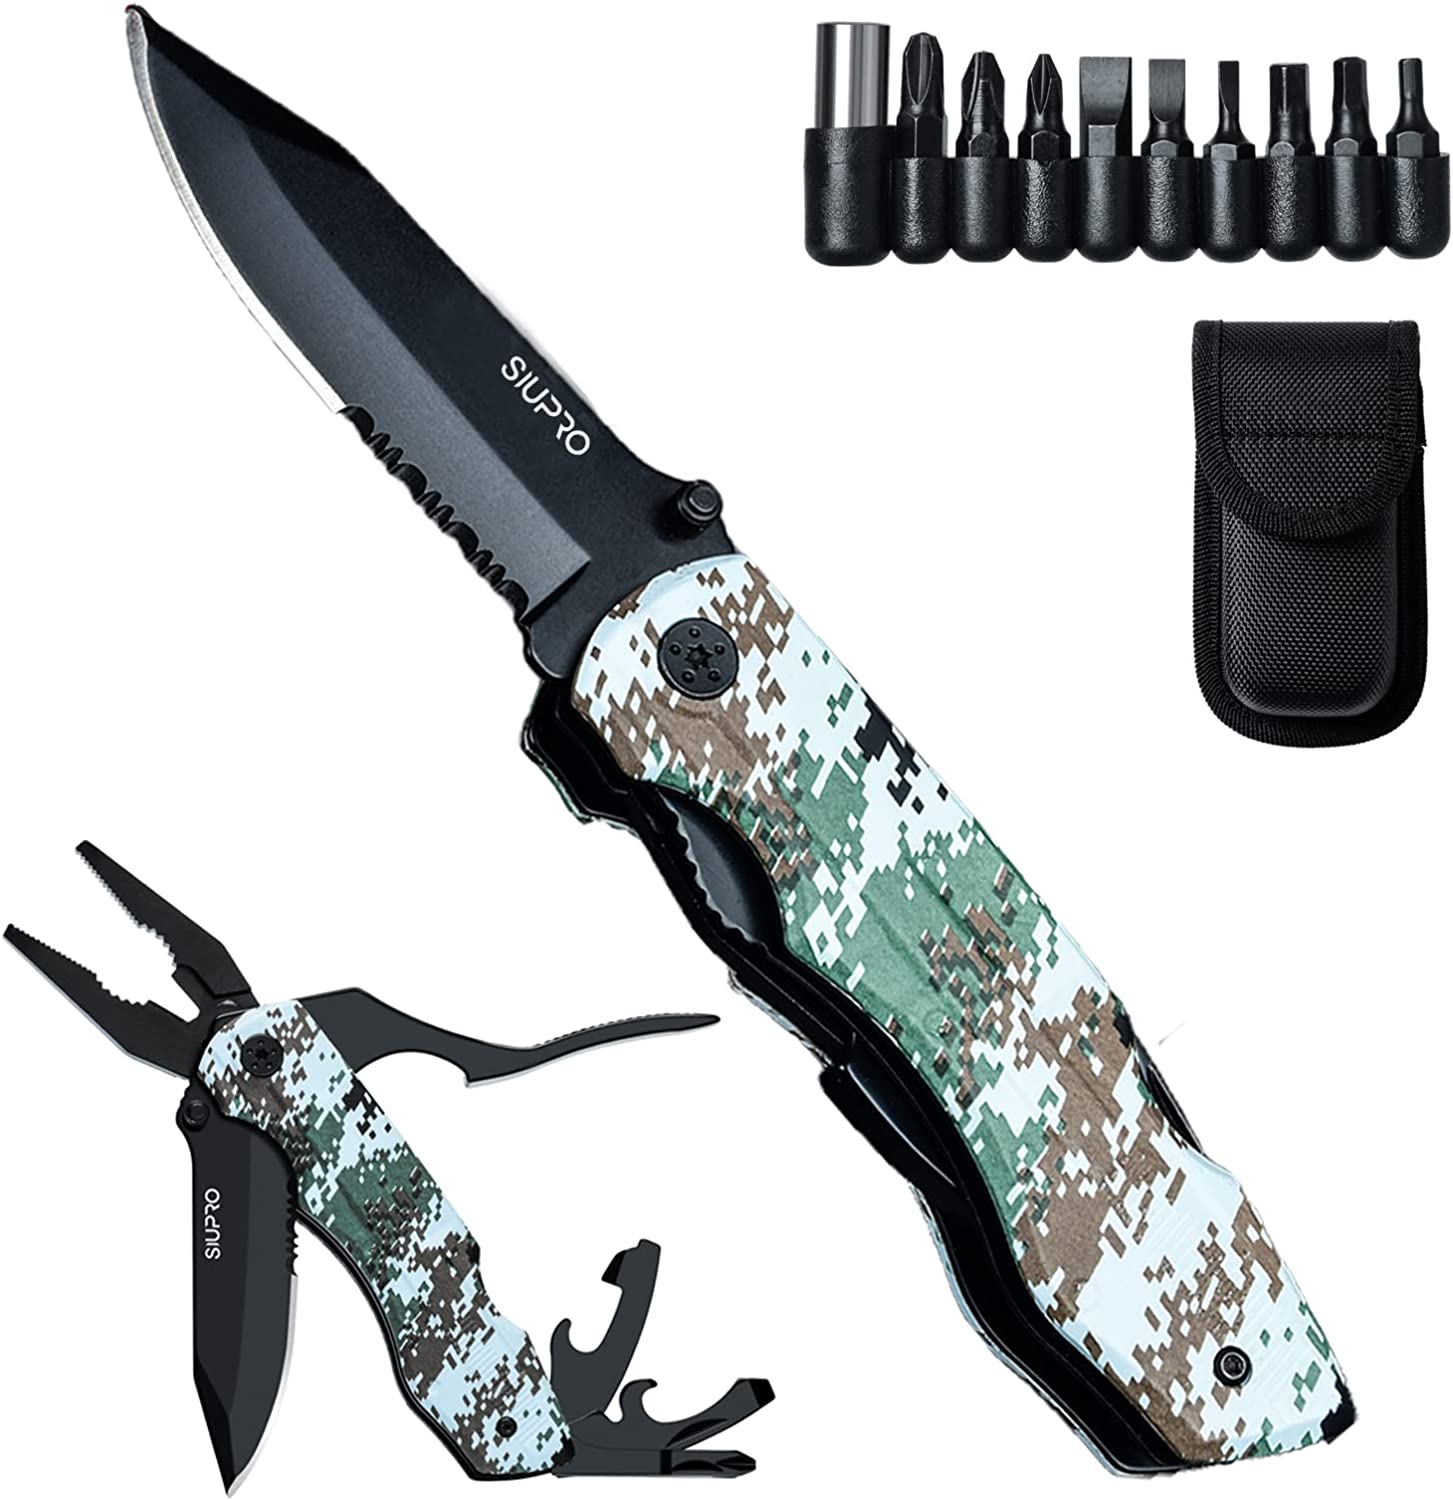 Unique Christmas Stocking Stuffers for Men, Birthday Gifts for Dad Husband Boyfriend Him, Multitool Pocket Knife Survival Multi Tool, Multipurpose Tactical Utility Pliers for Fishing Camping